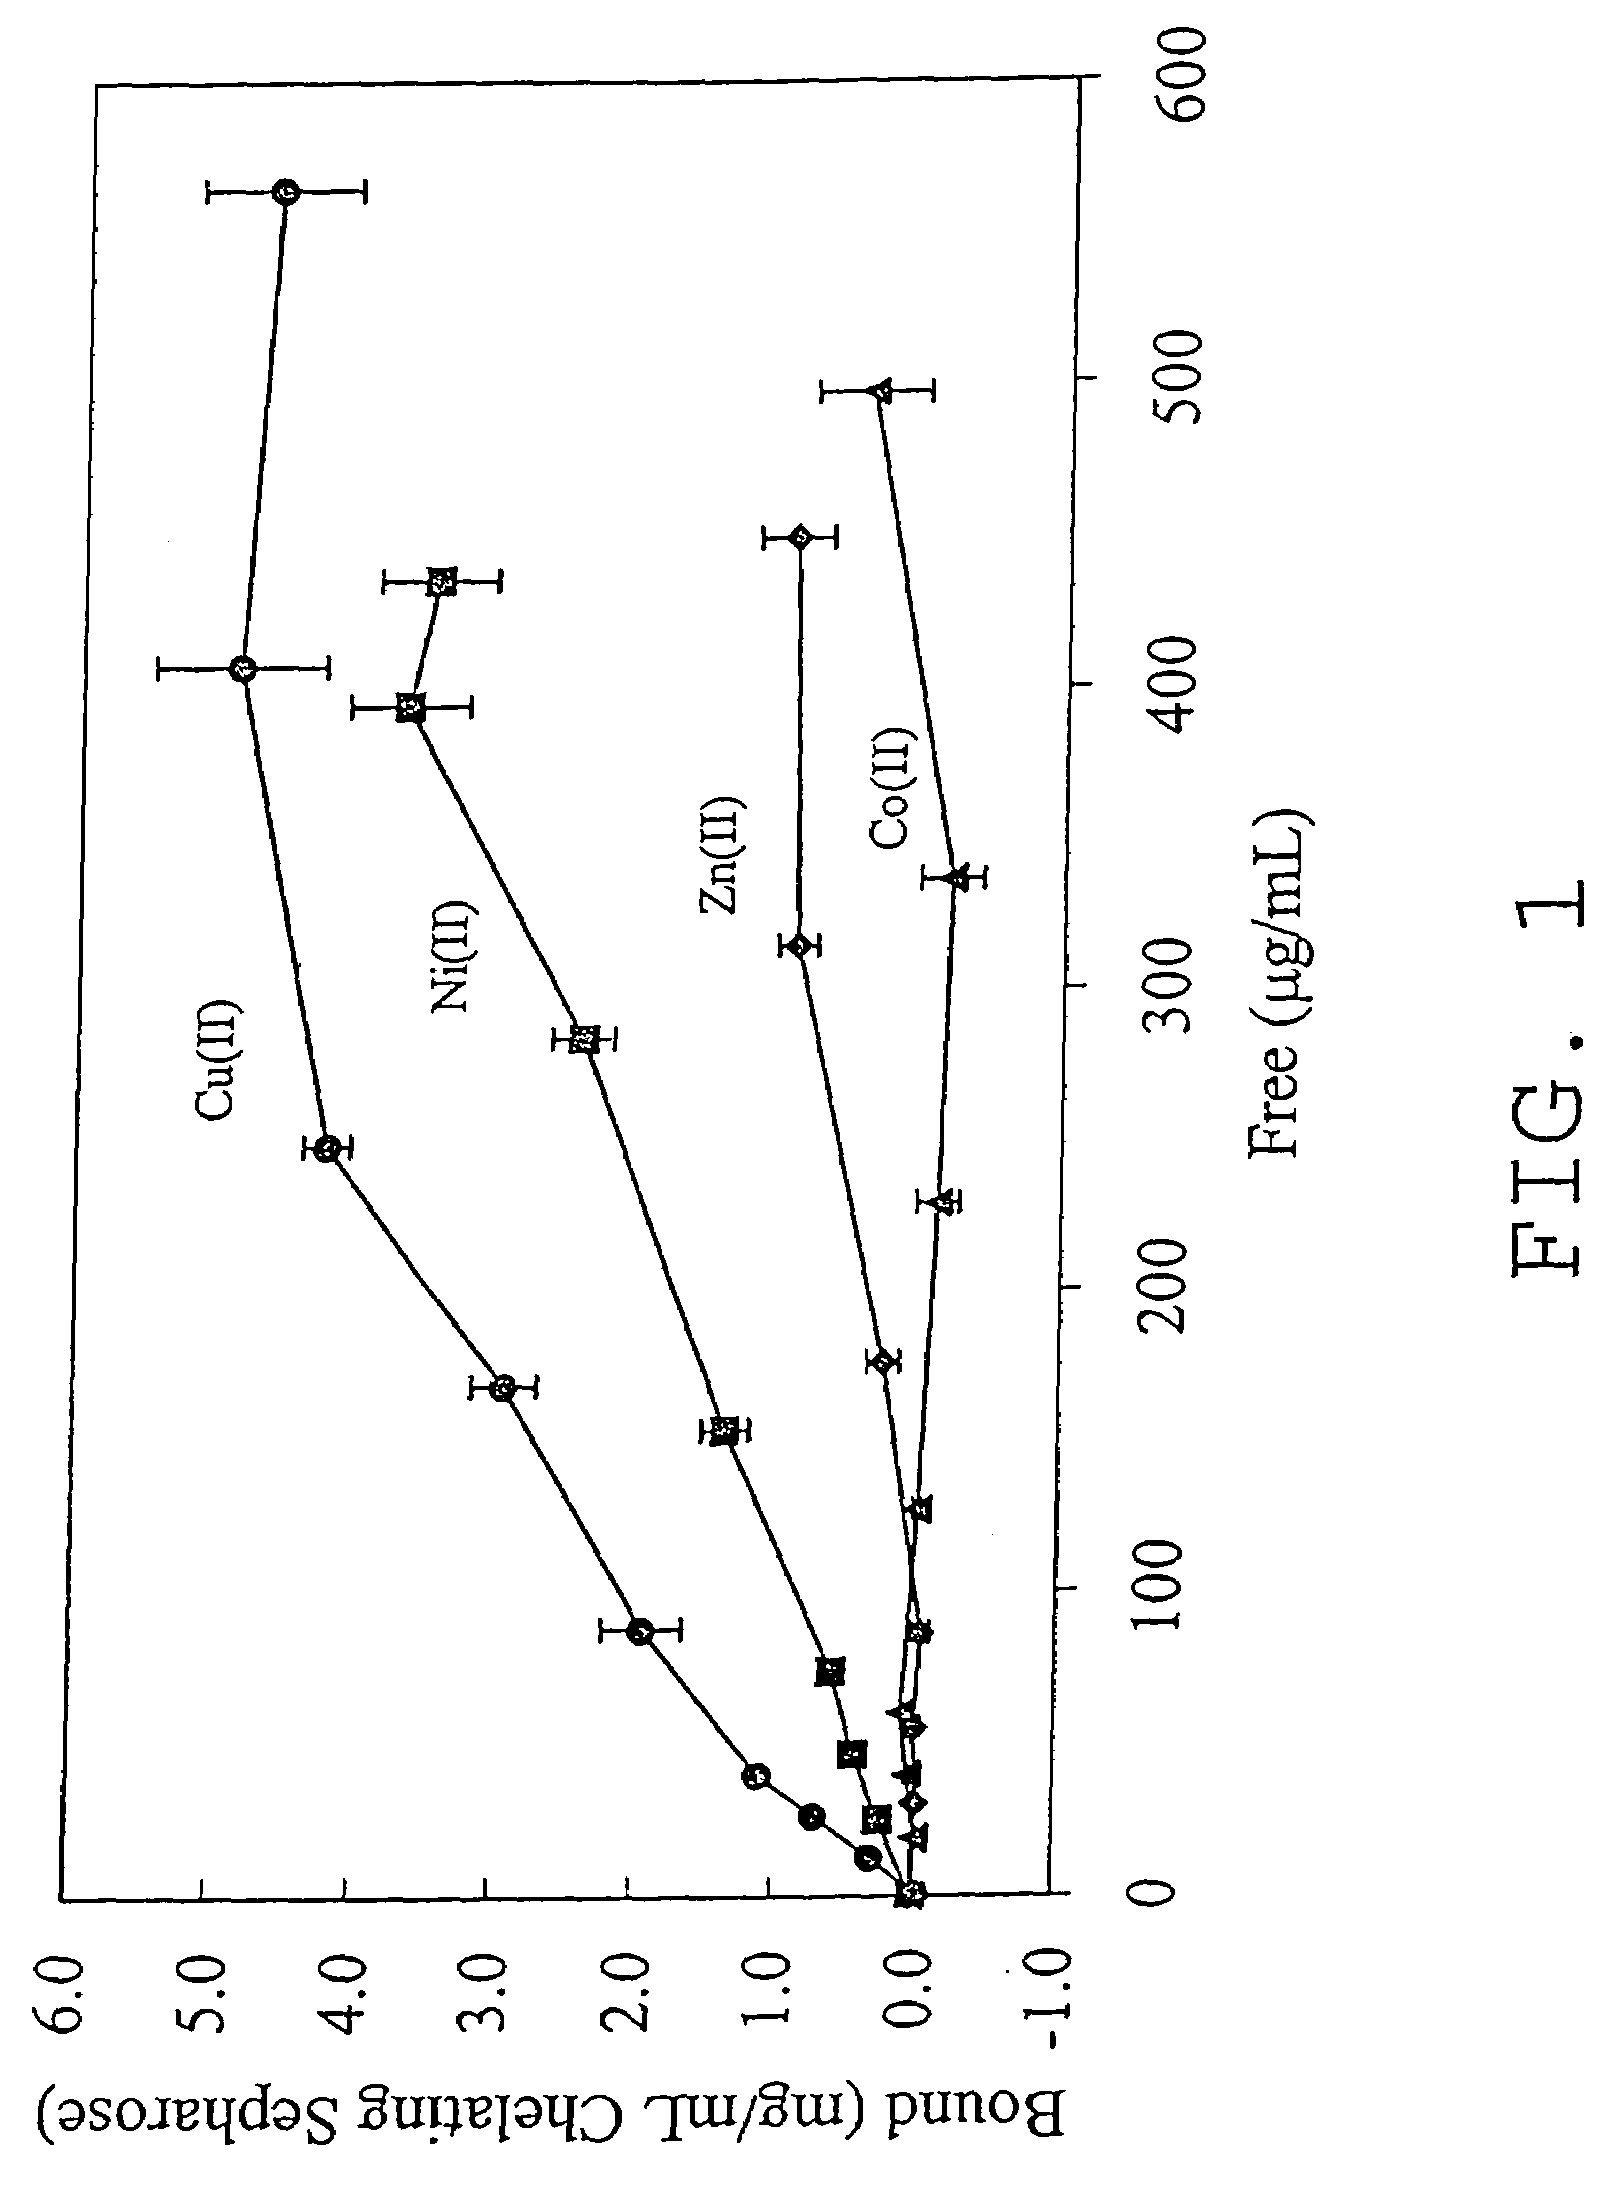 Nucleic acid separation using immobilized metal affinity chromatography